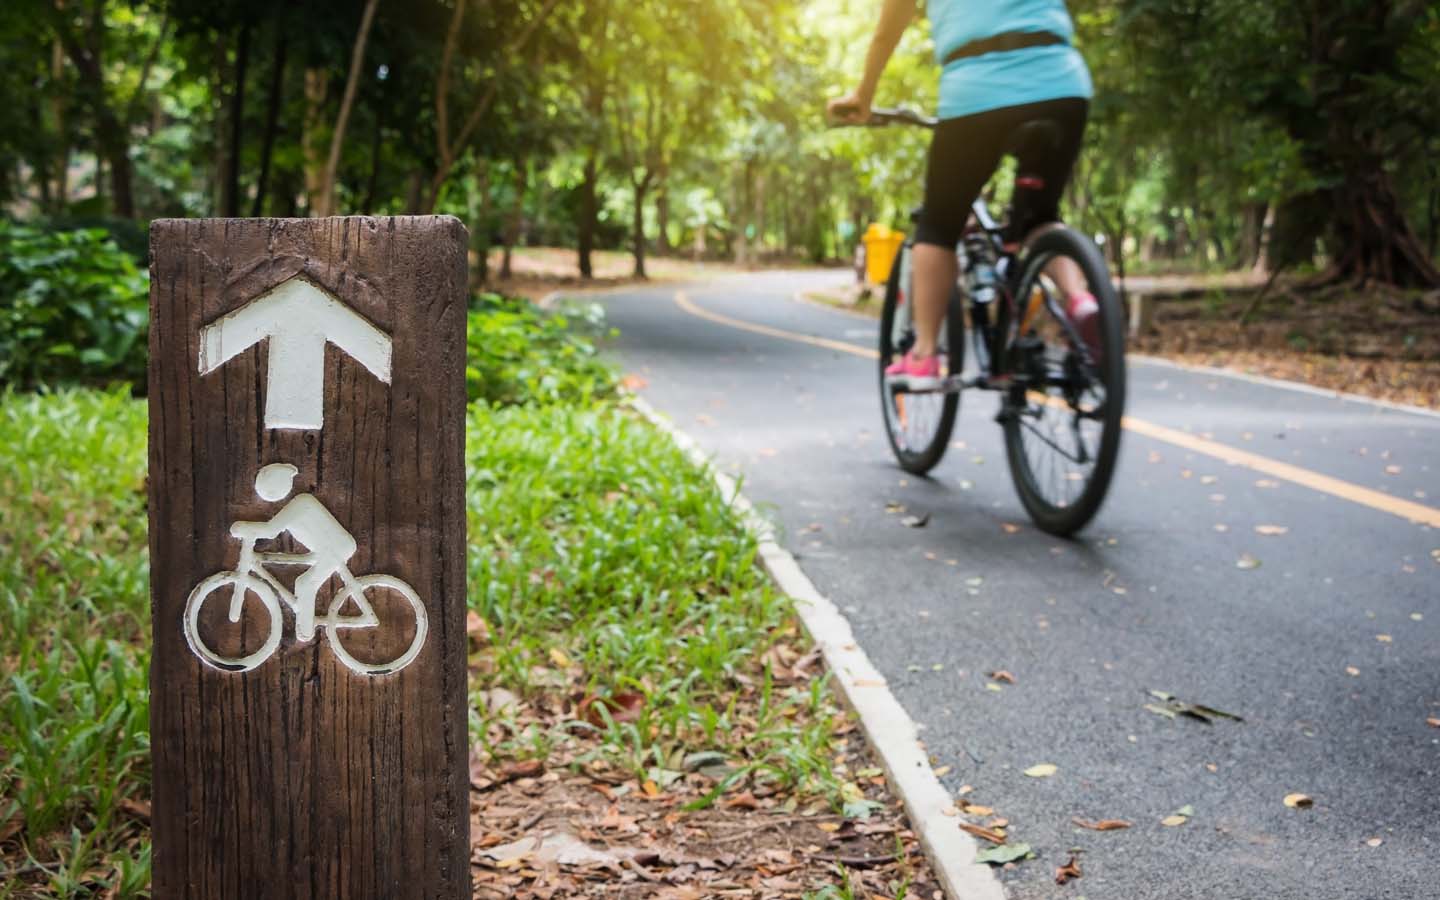 the luxury development has cycling track among other amenities